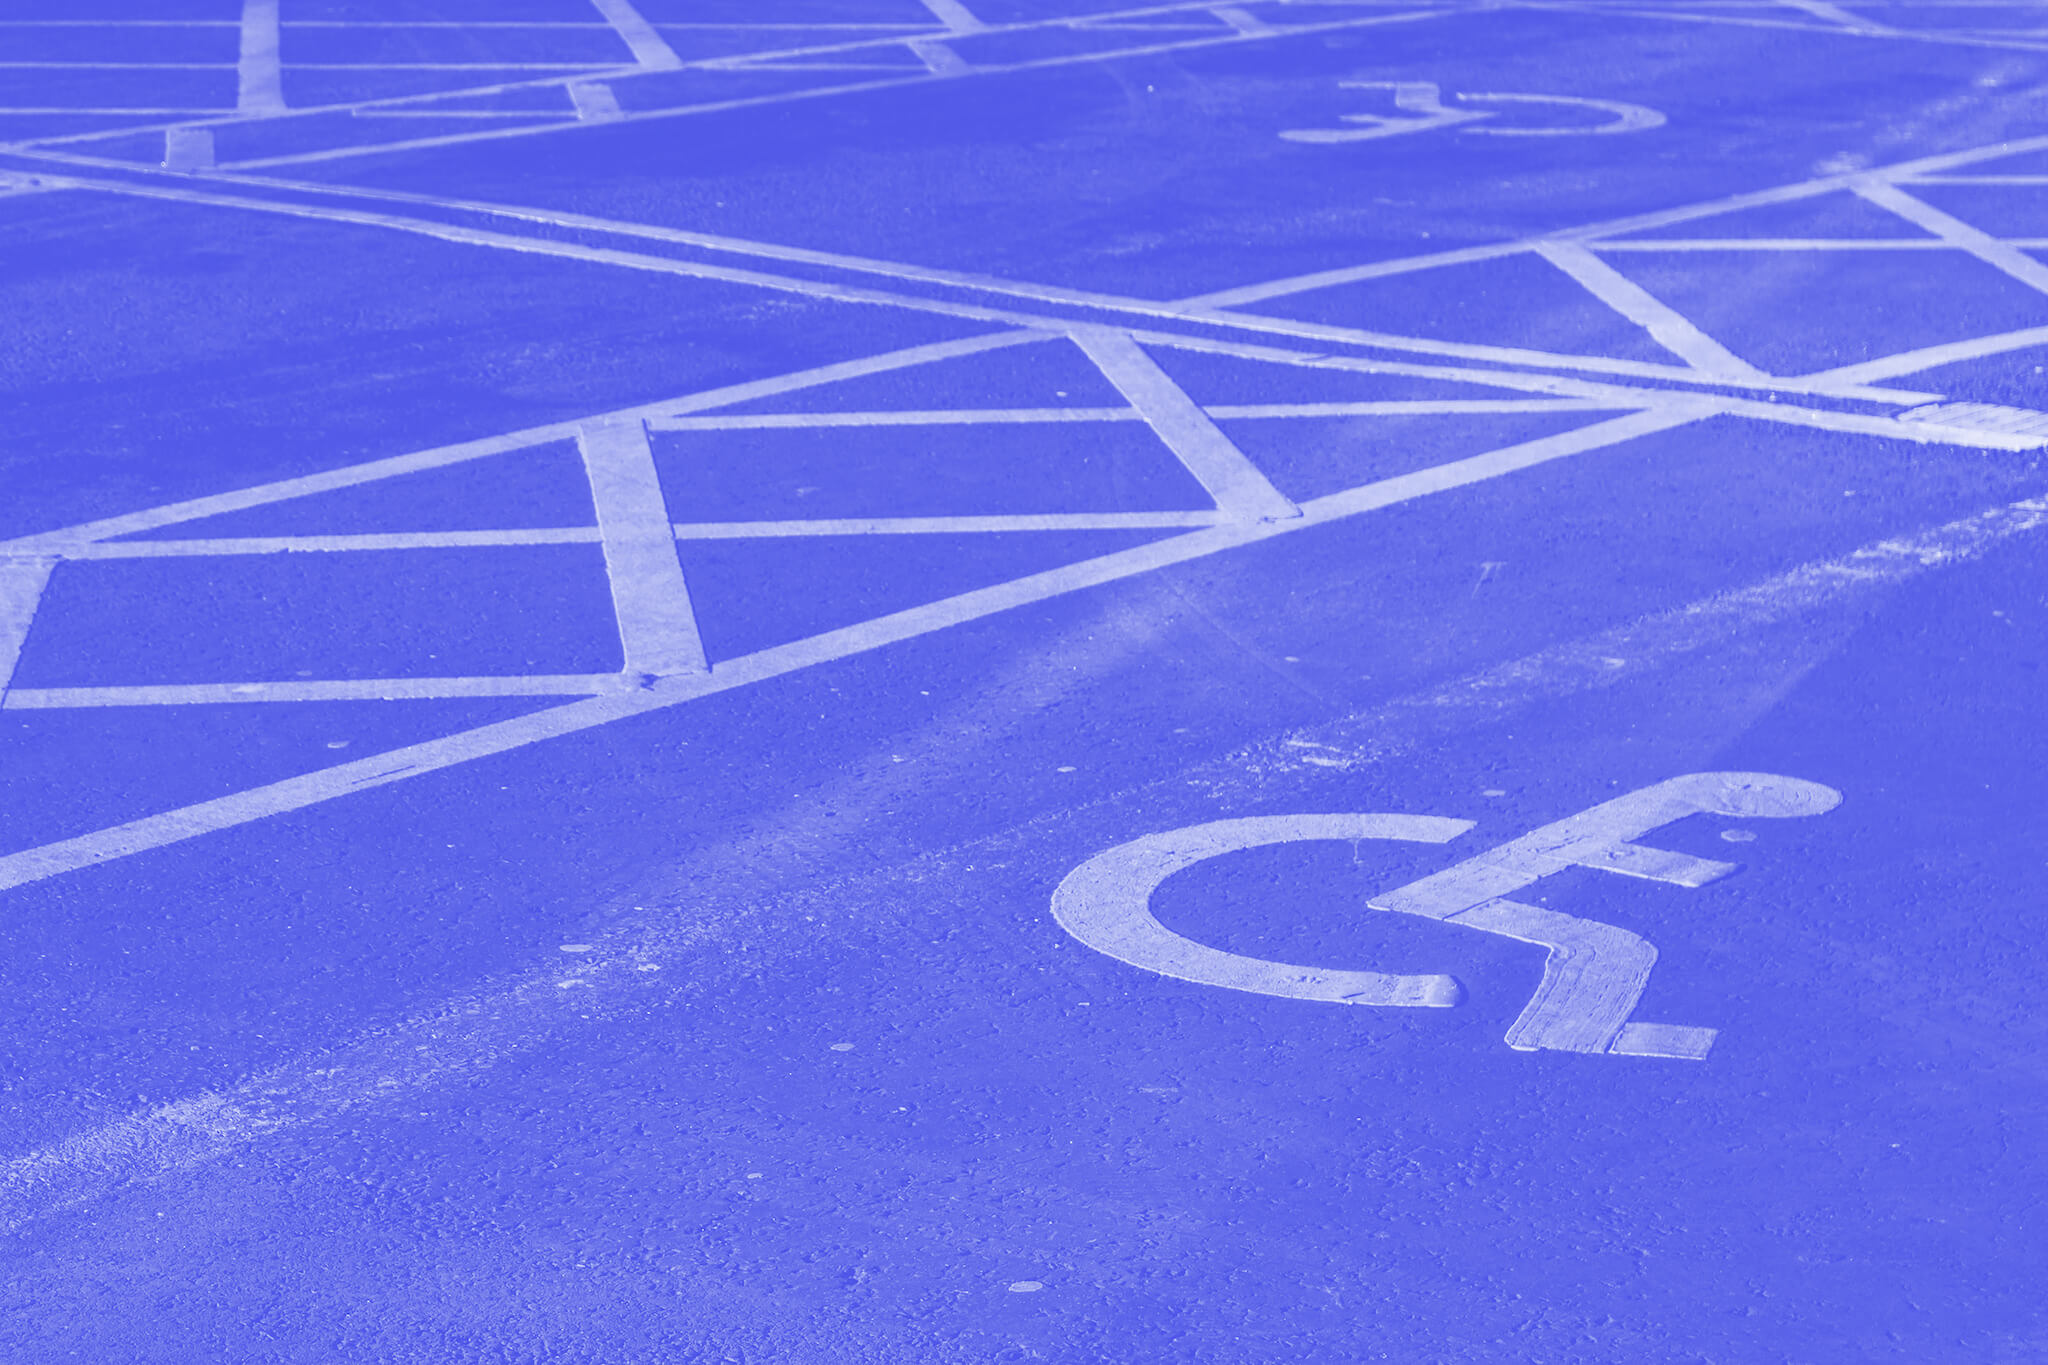 A blue parking lot with white markings including the international symbol for accessibility (wheelchair symbol)